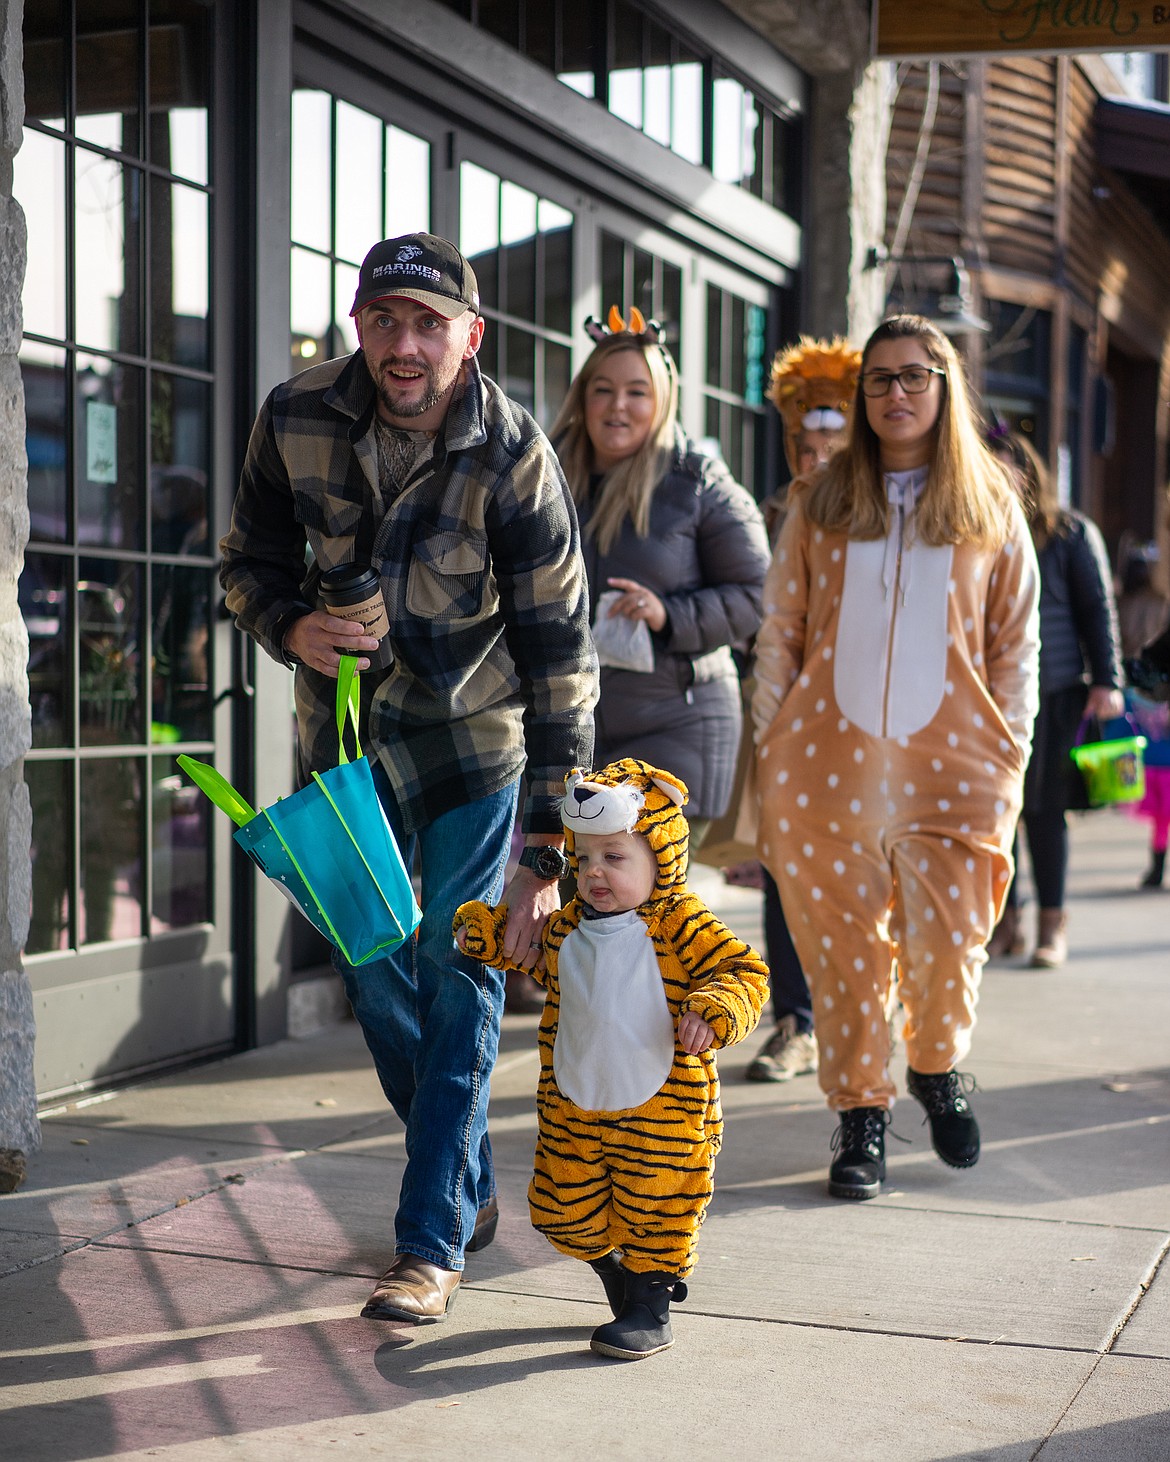 A tiger follows his handler during the Whitefish Trick or Treat downtown on Thursday. (Daniel McKay/Whitefish Pilot)